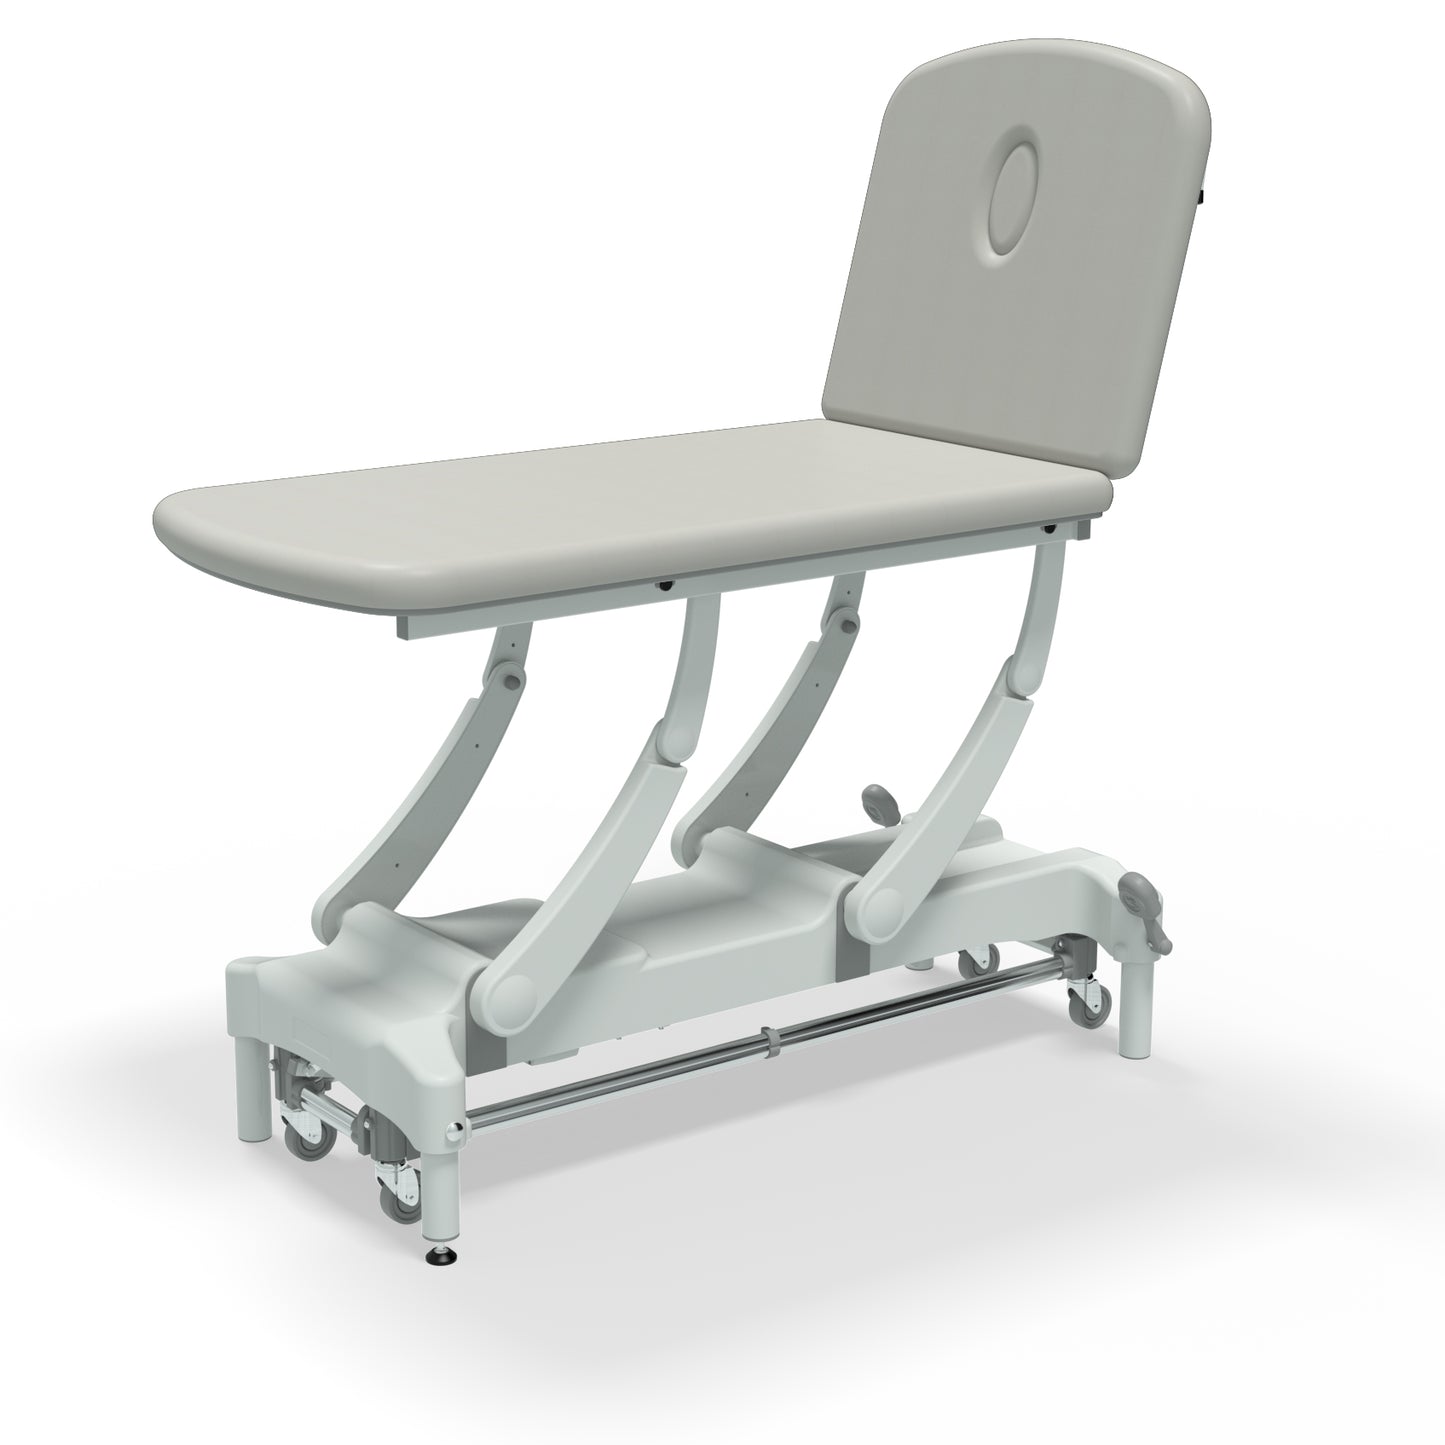 Seers - CLINNOVA Therapy 2 Section Electric Couch, standard head section with base and switch options (265Kg SWL)